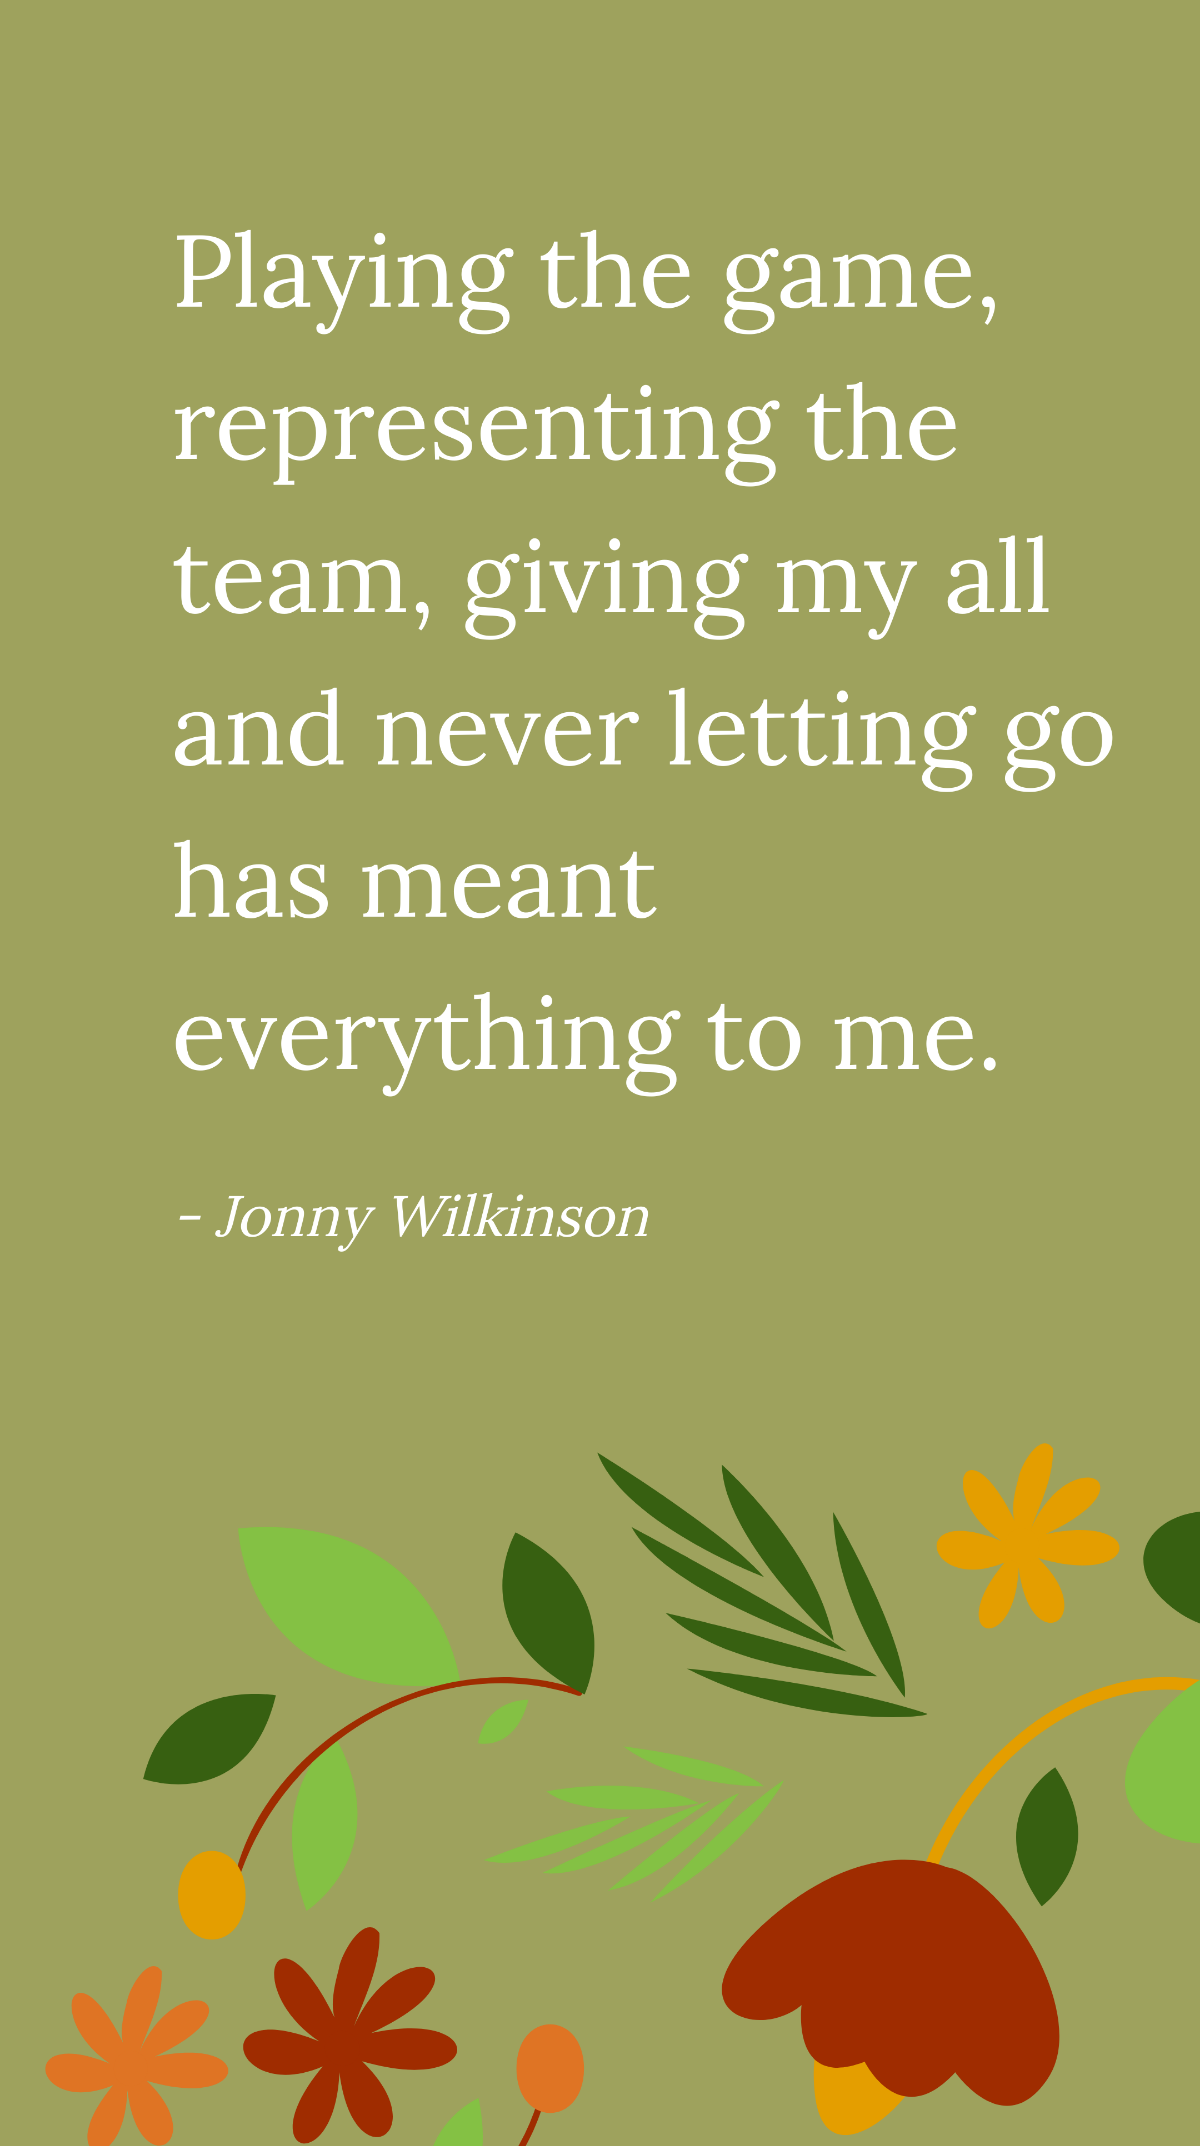 Jonny Wilkinson - Playing the game, representing the team, giving my all and never letting go has meant everything to me.